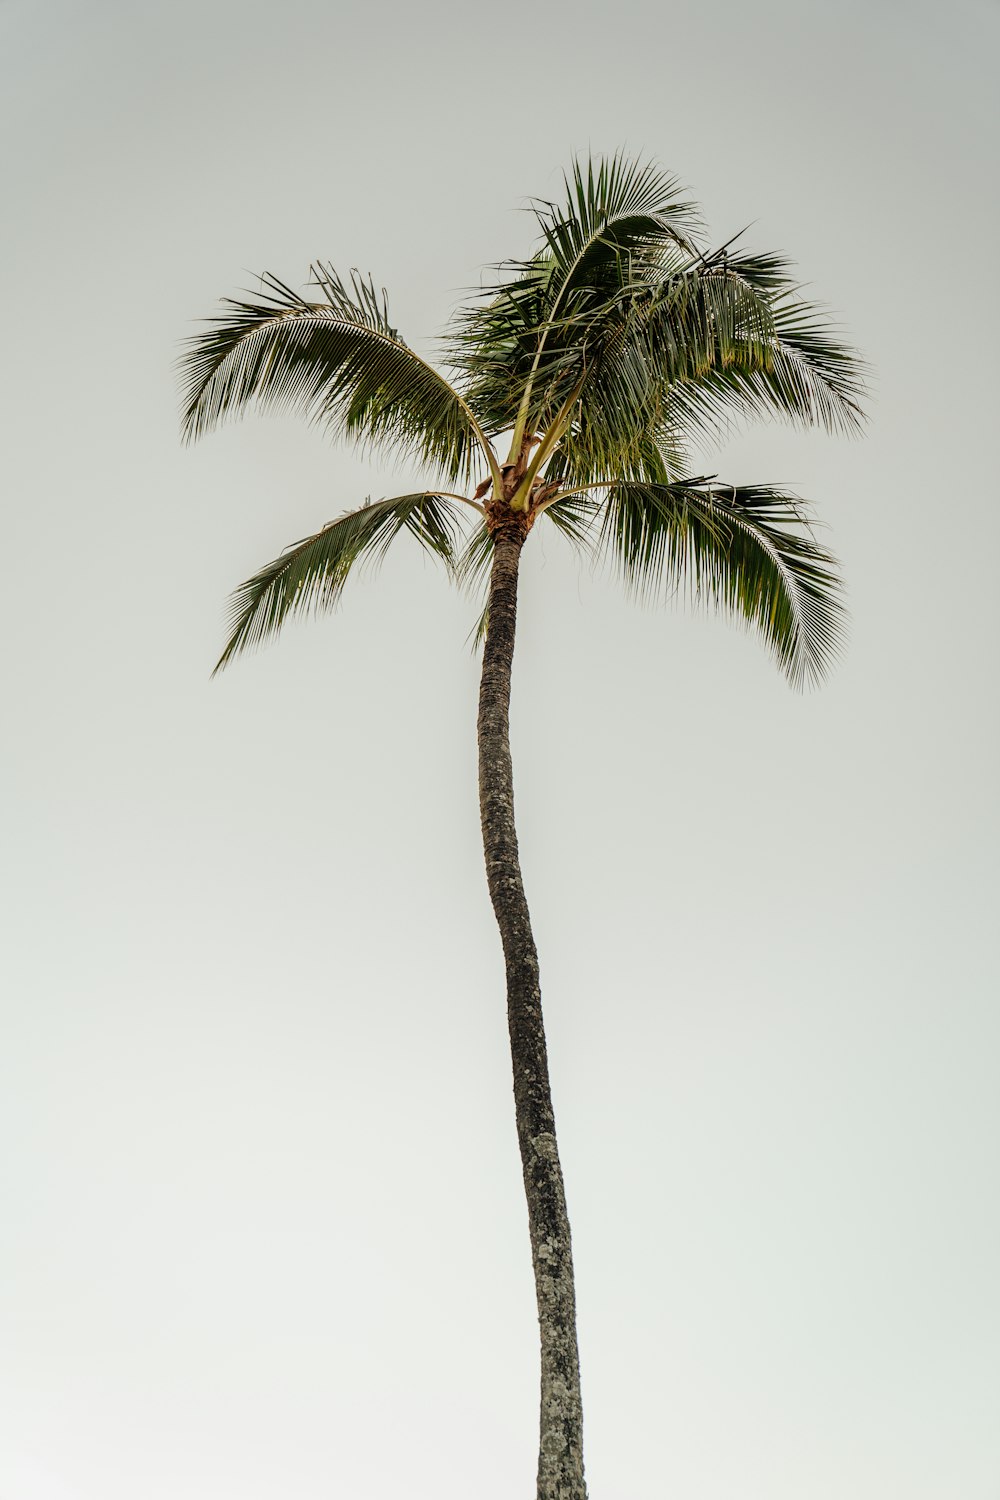 coconut tree during daytime